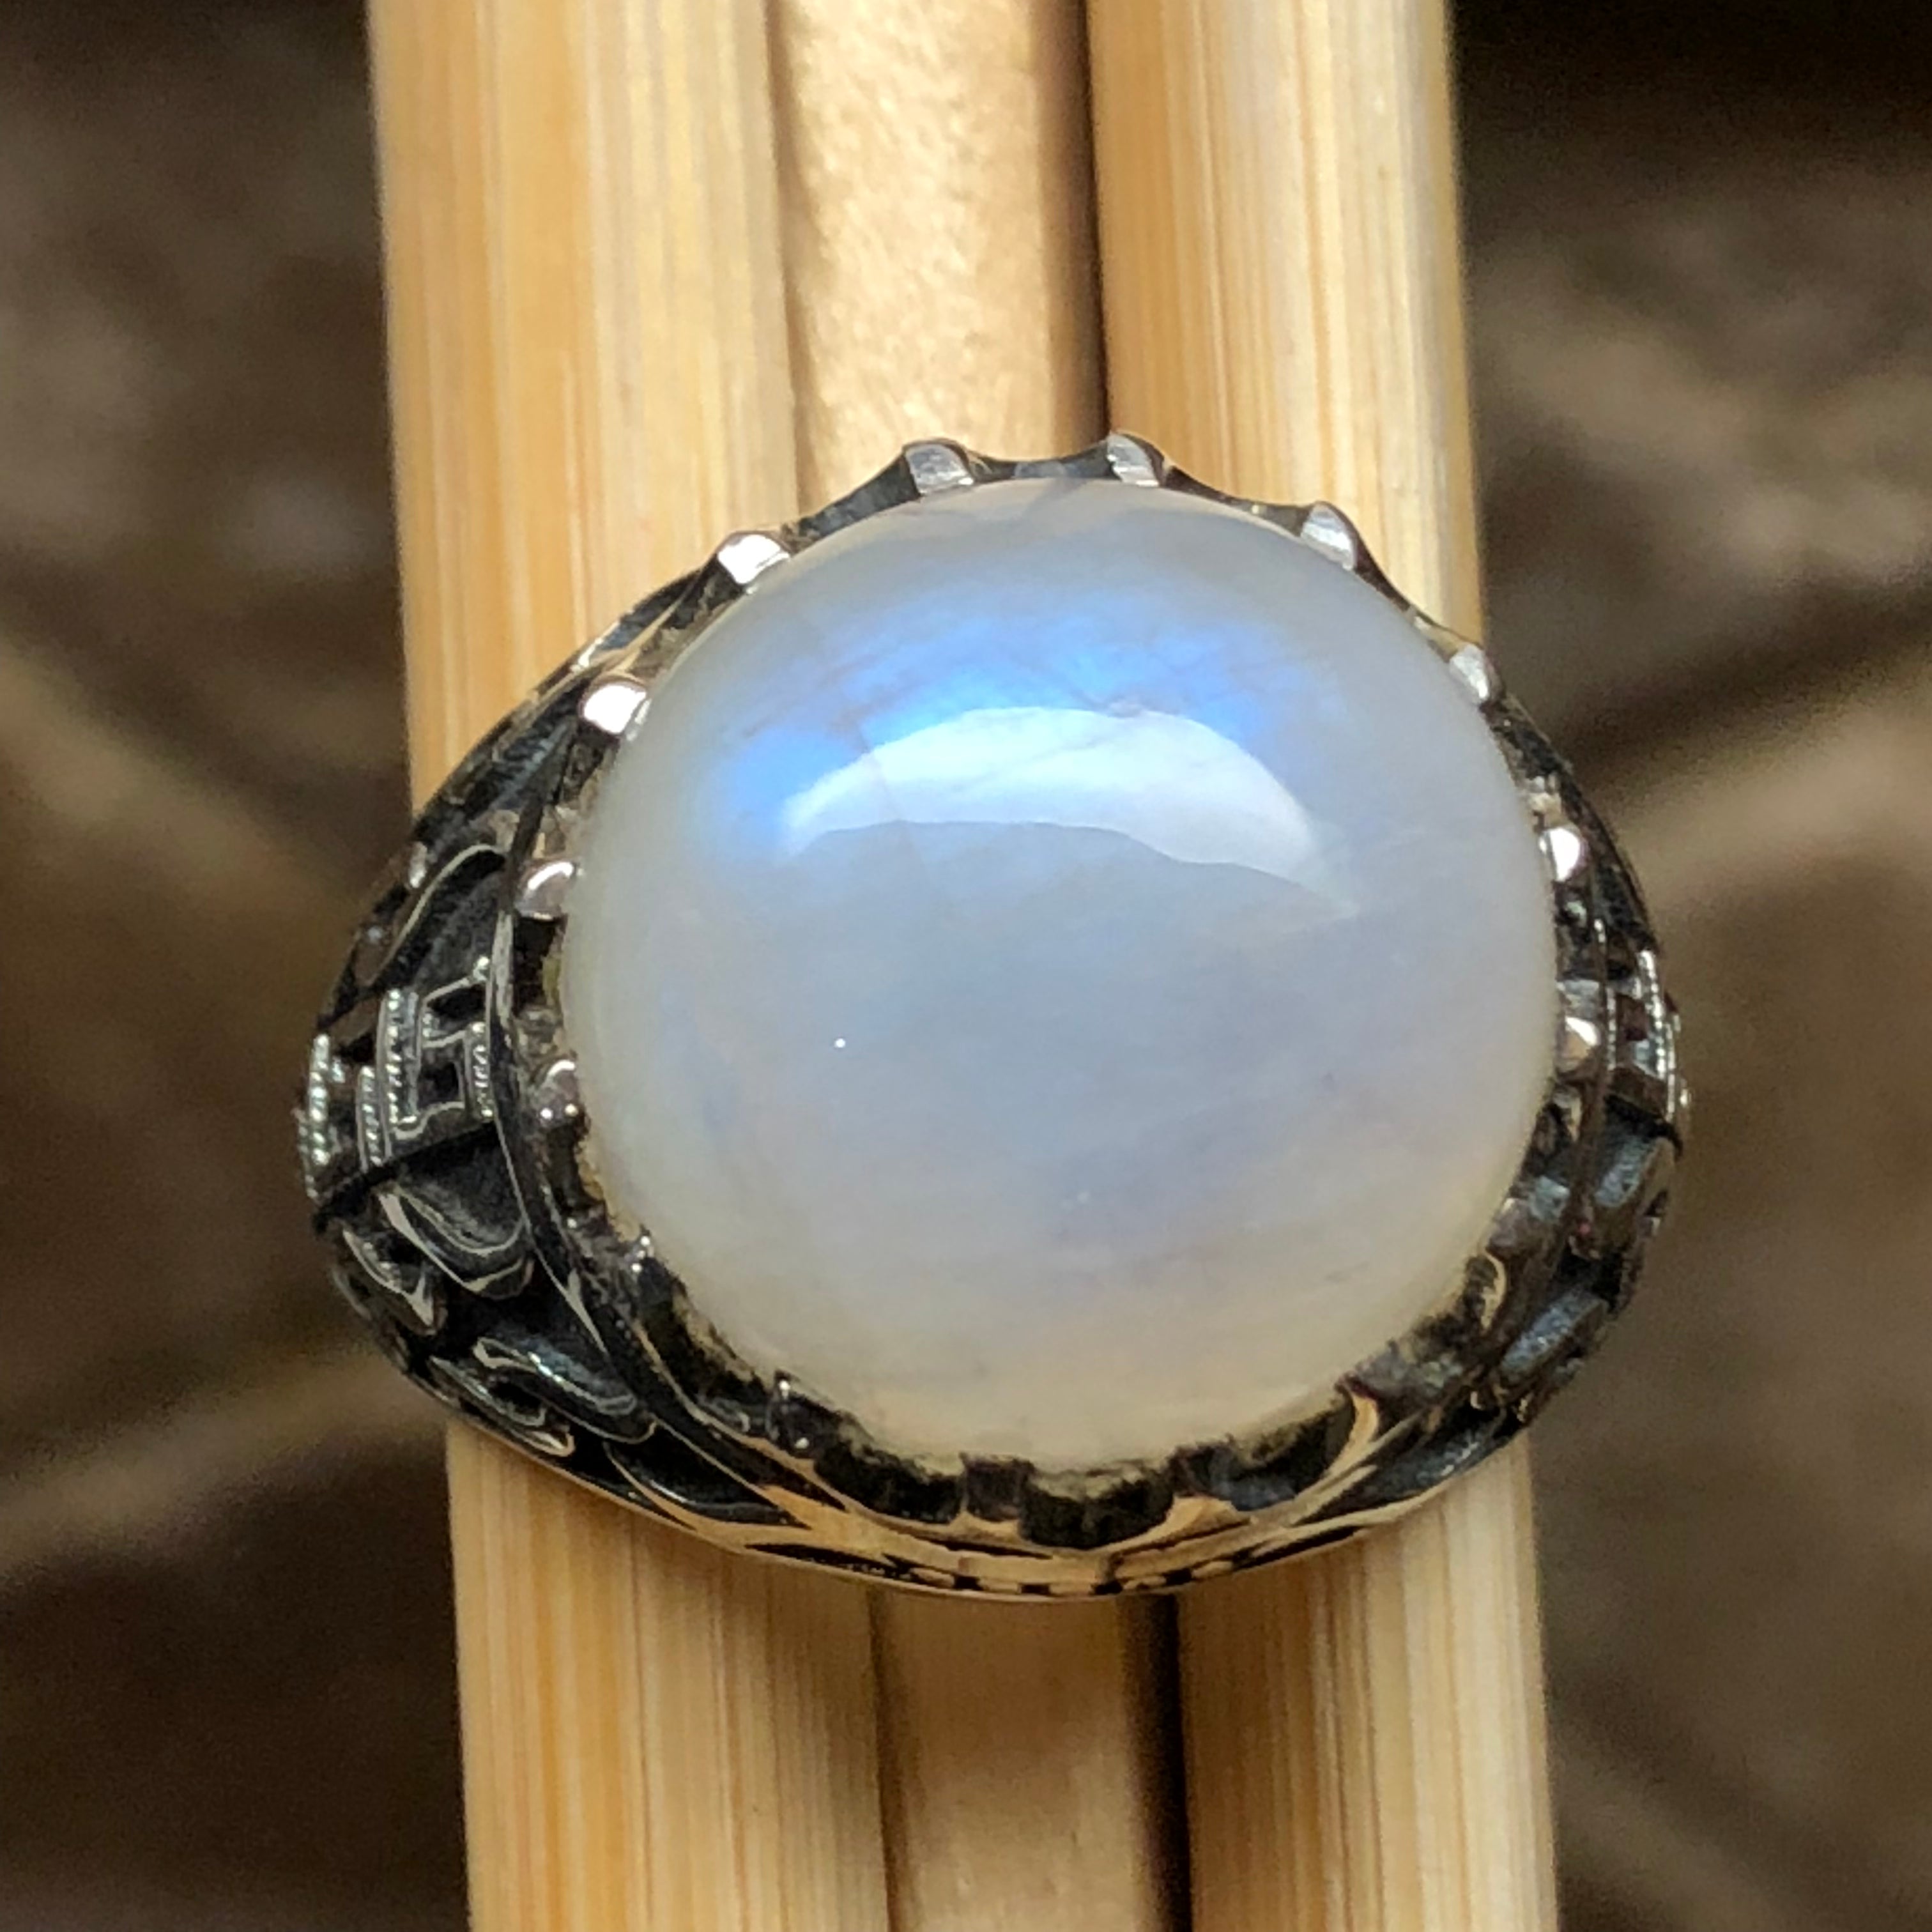 Natural Rainbow Moonstone 925 Sterling Silver Solitaire Men's Ring Size 8, 9, 10, 11, 12 - Natural Rocks by Kala